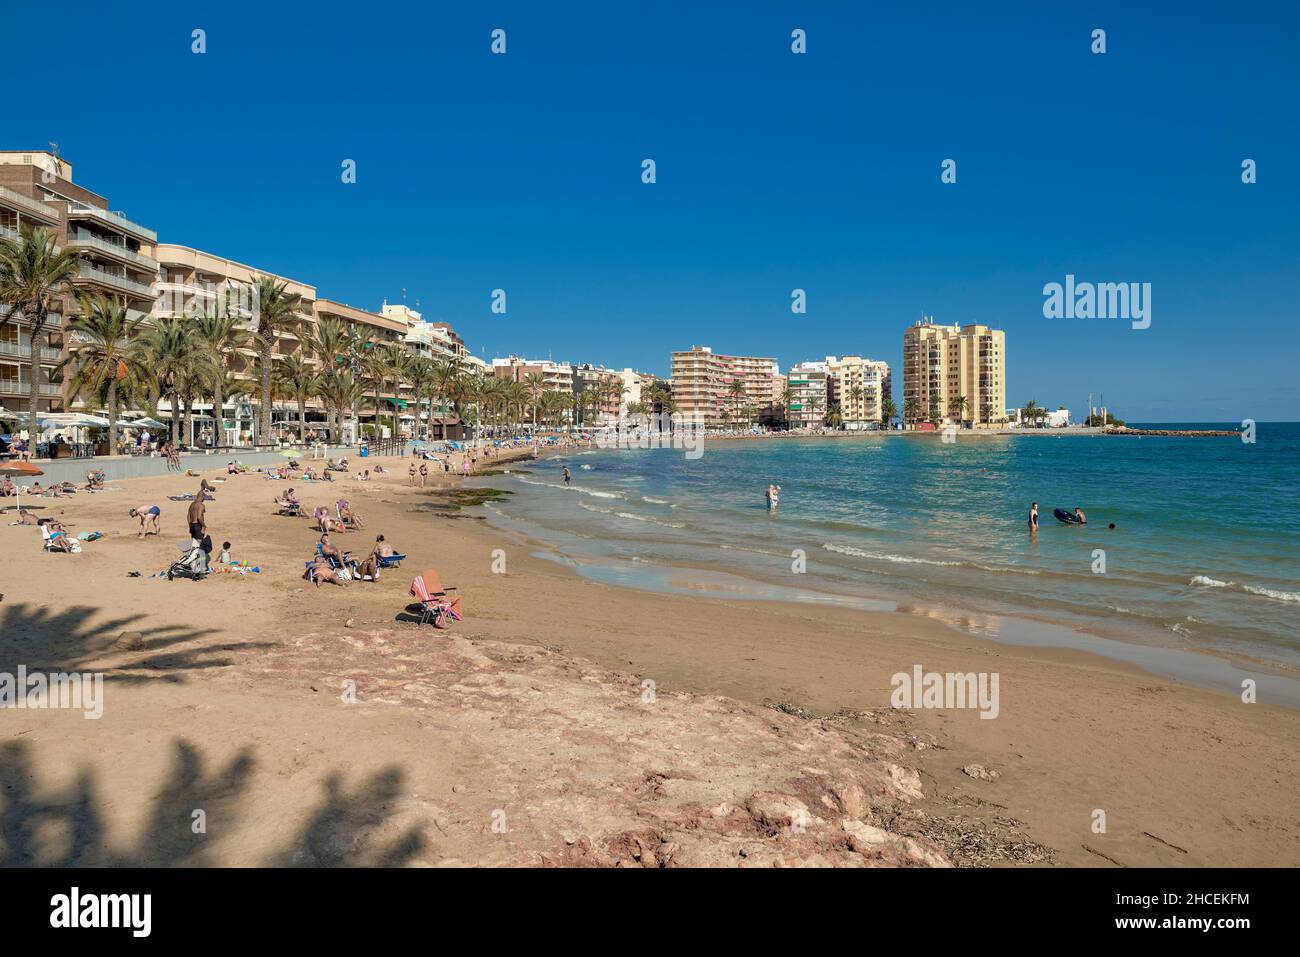 Beach and Overlooking Apartments Torrevieja Spain Beachfront Seafront Resort Stock Photo